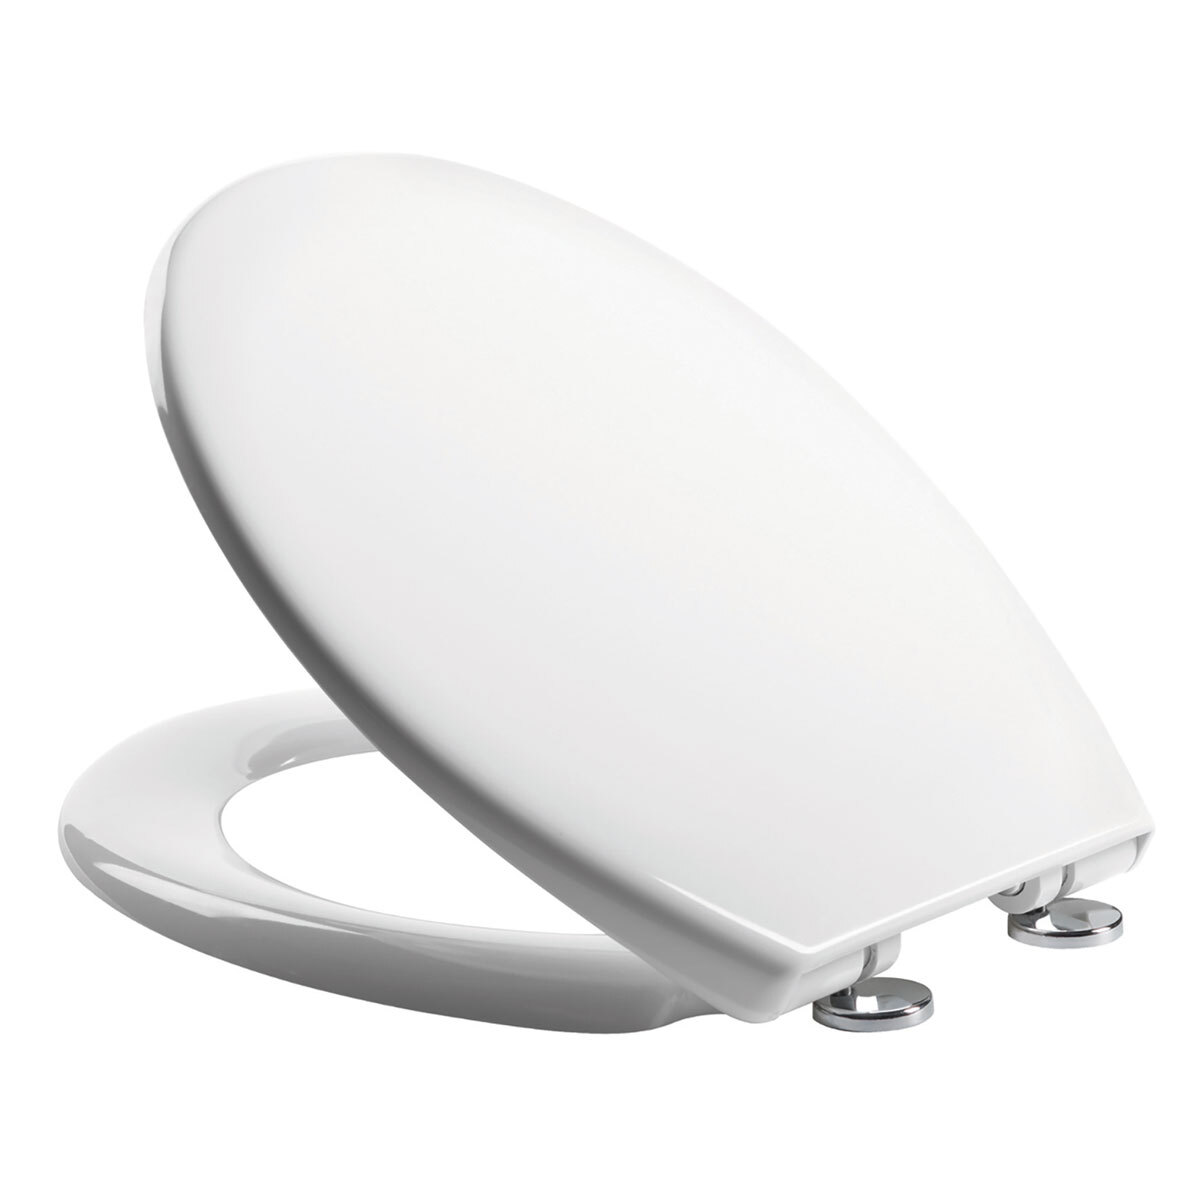 Cut out image of toilet seat on white background